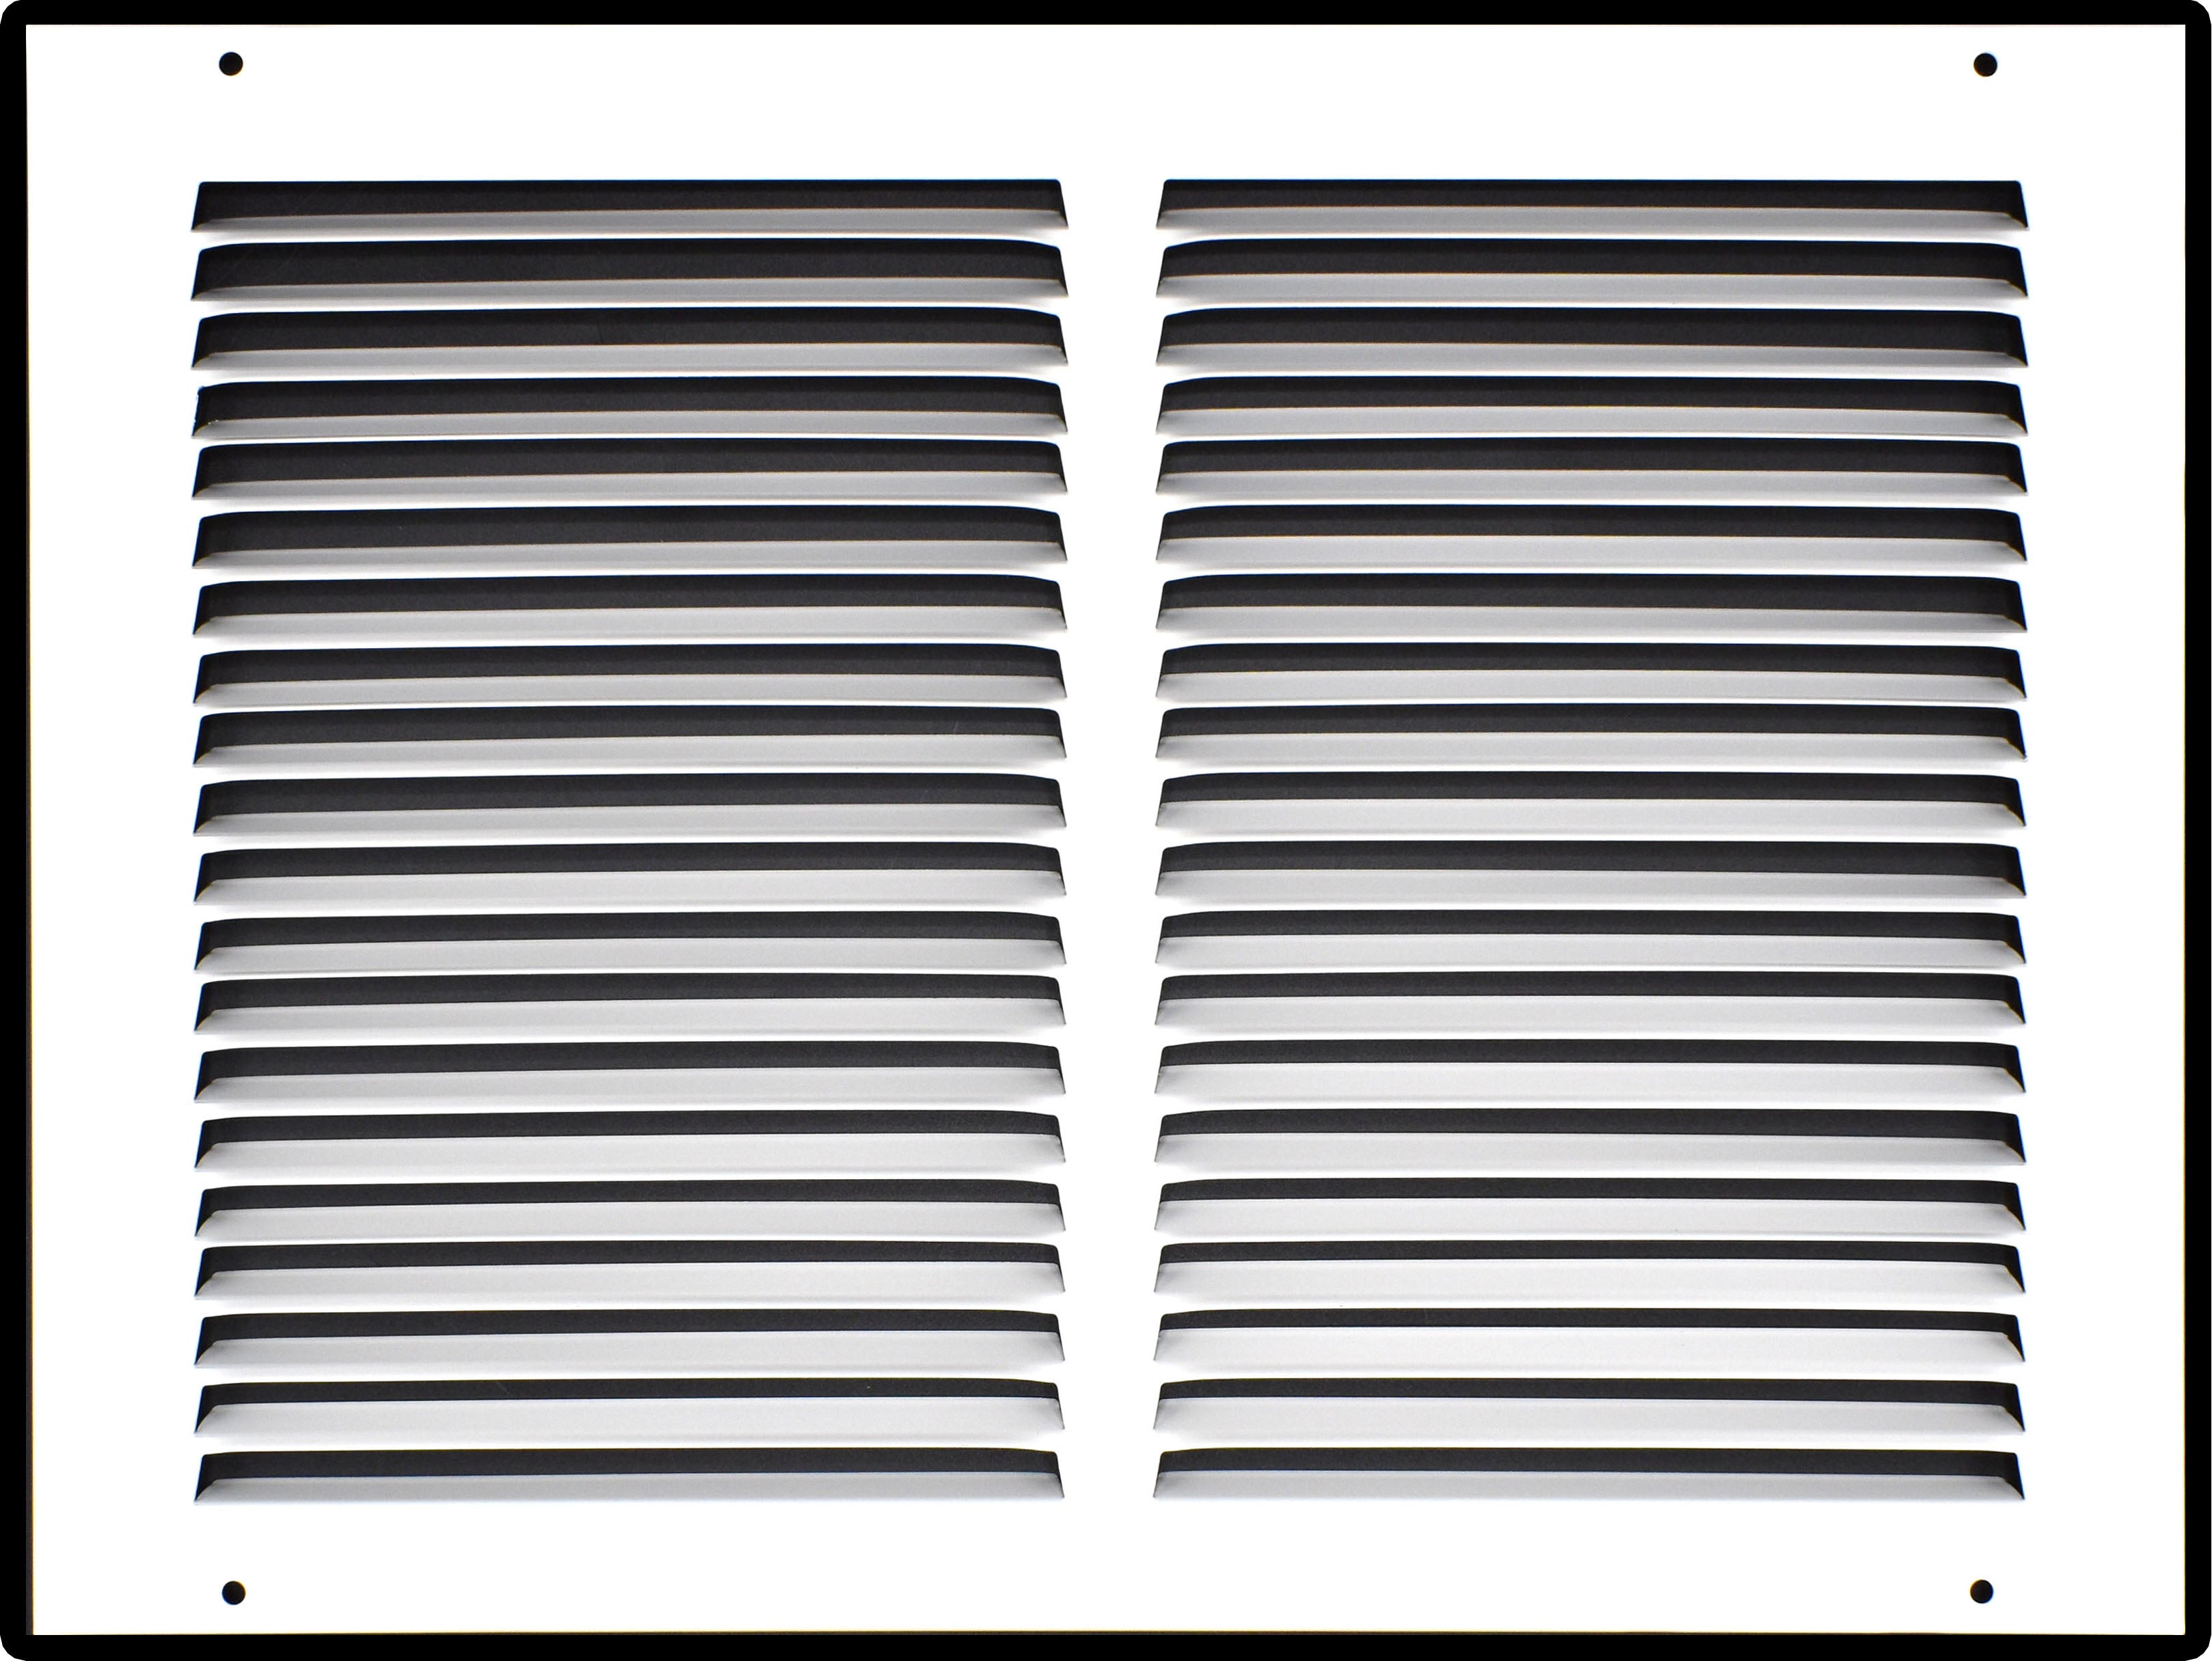 14" X 10" Duct Opening | Steel Return Air Grille for Sidewall and Ceiling | Outer Dimensions: 15.75"W X 11.75"H